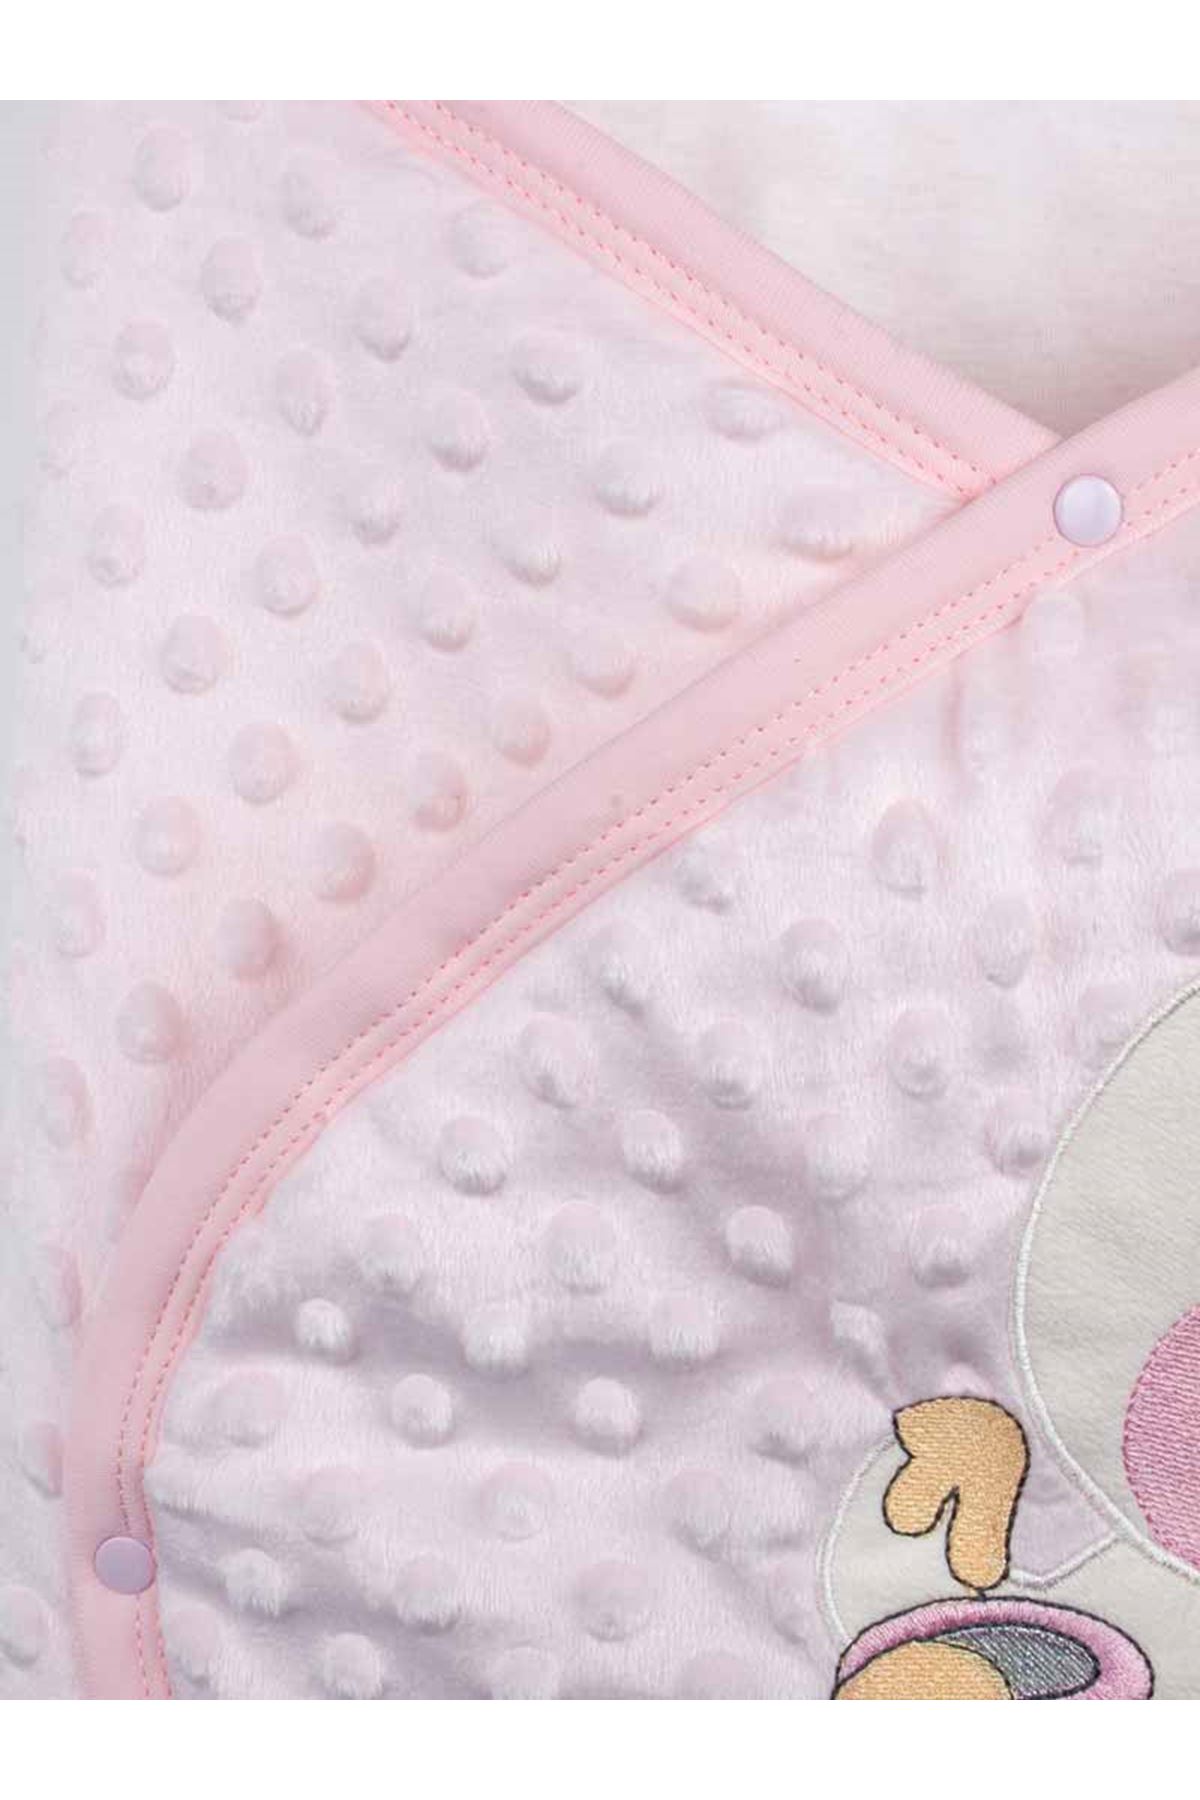 Pink Baby Girl Swaddle Hospital Outlet Newborn Teddy Chickpea Pattern Cotton Soft Baby Stroller Bed Models